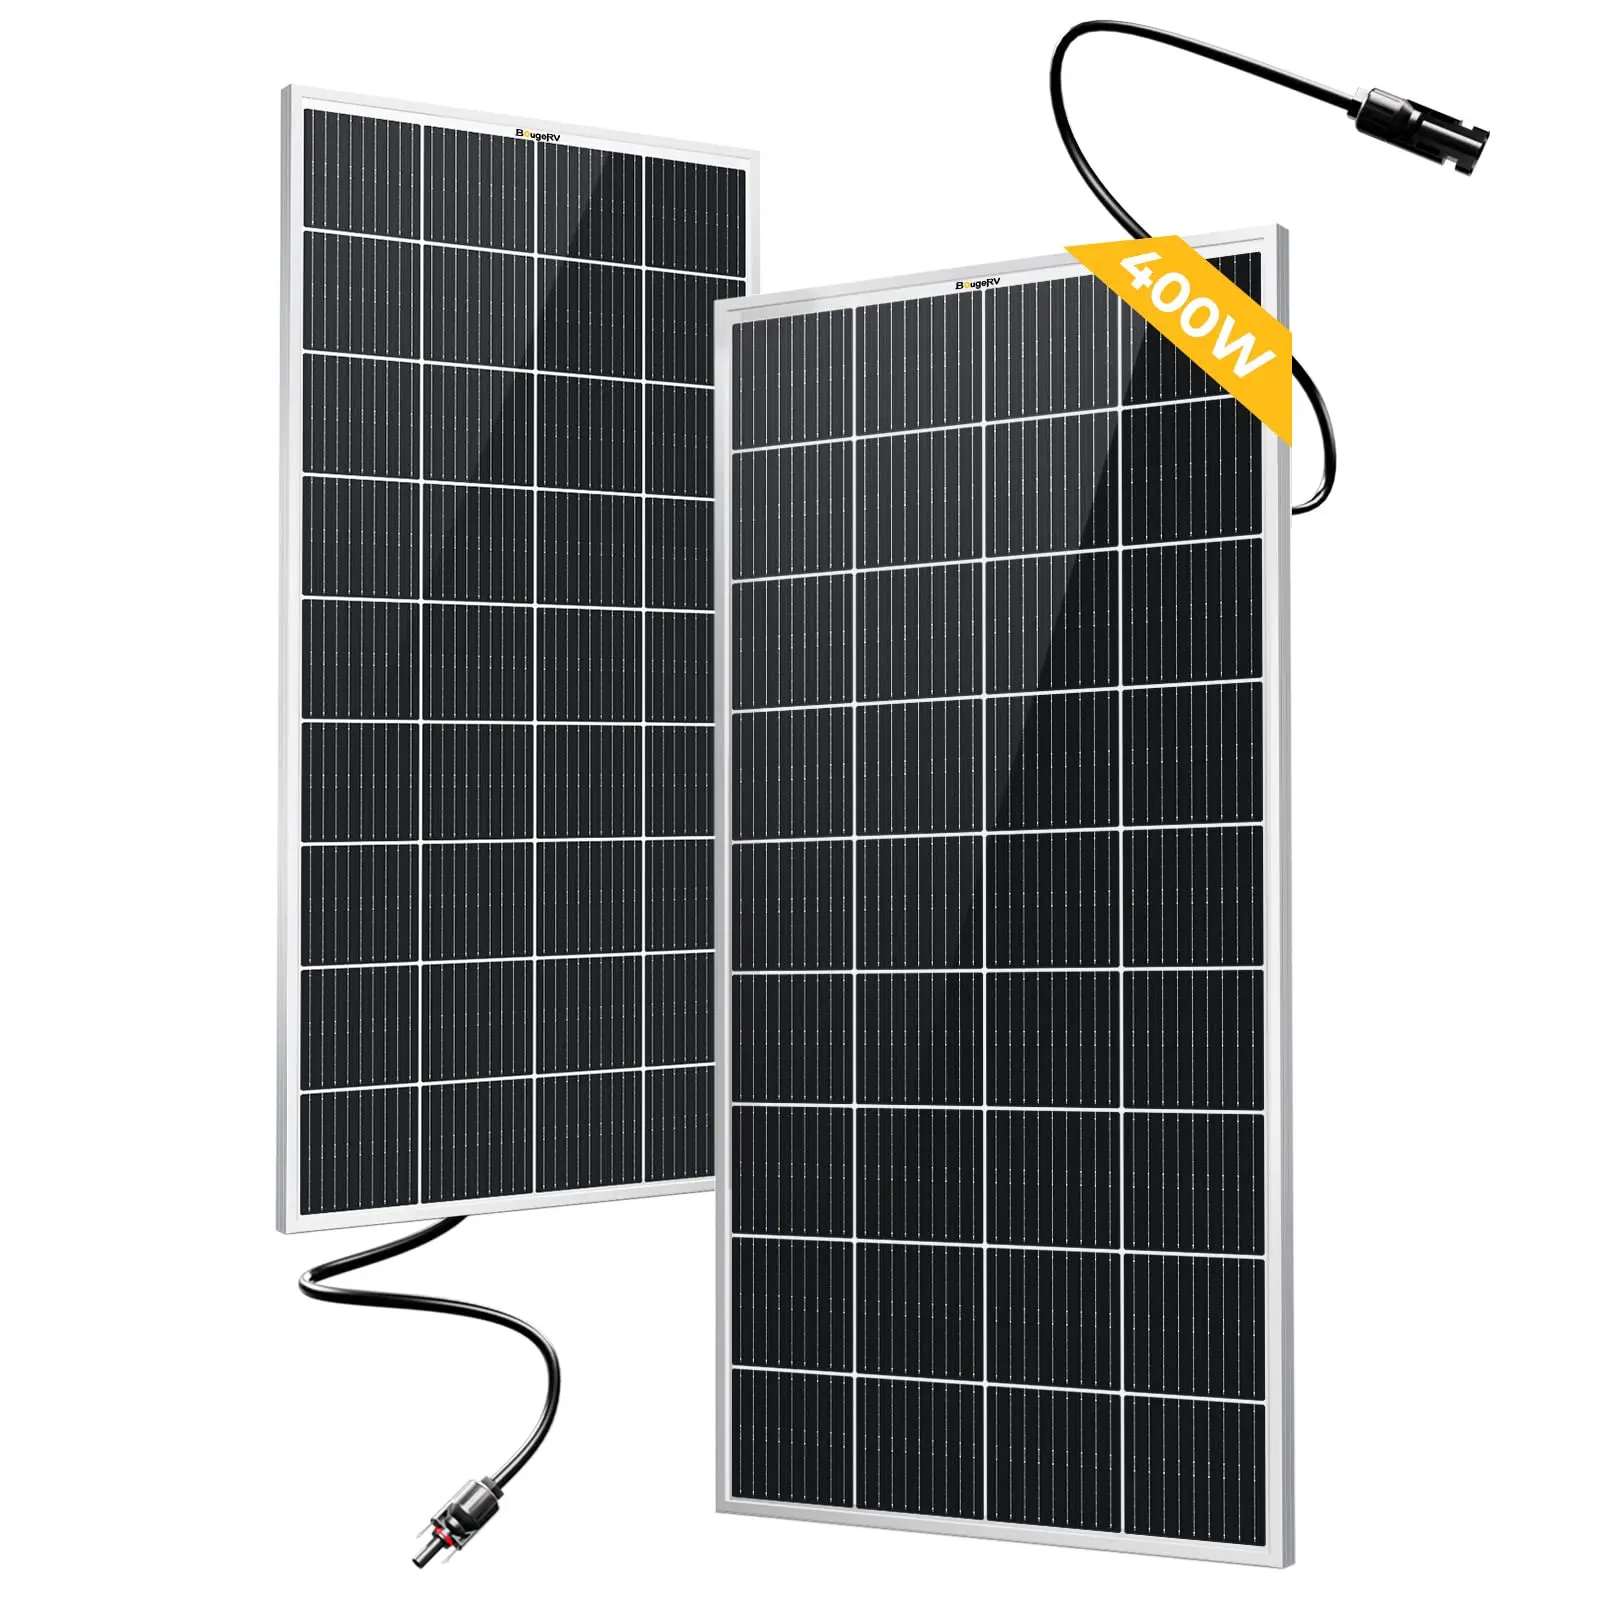 400w solar panels - How much does 400 solar panels cost